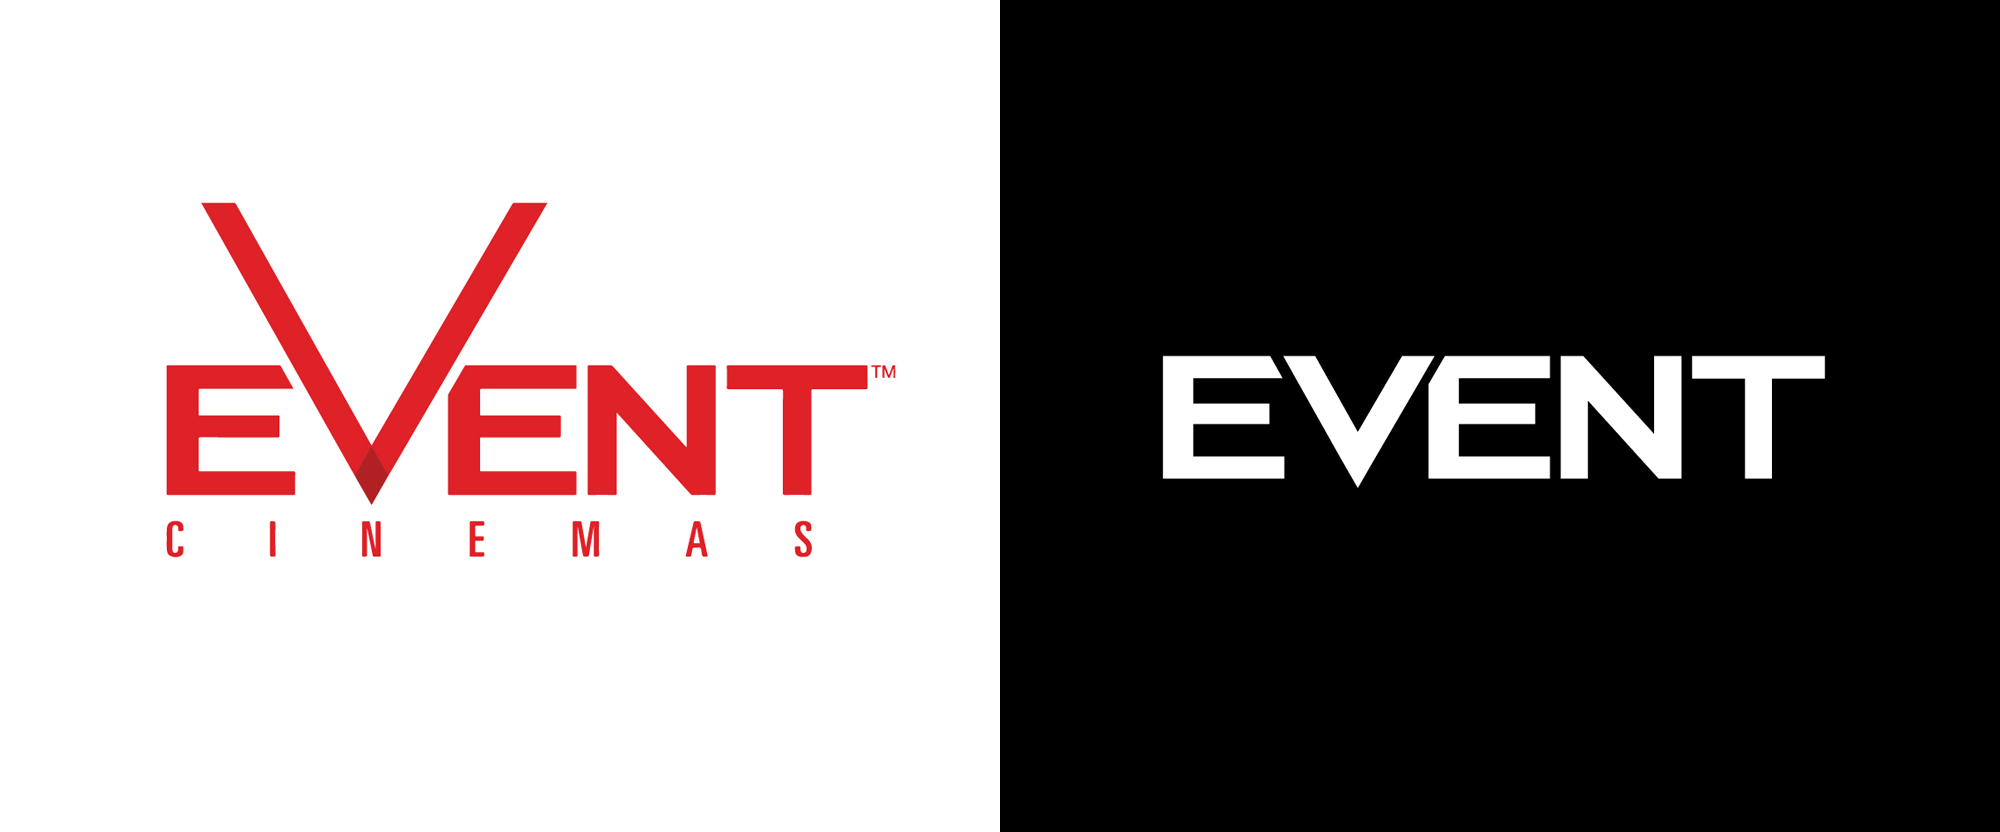 Brand New: New Logo and Identity for Event Cinemas by Landor.